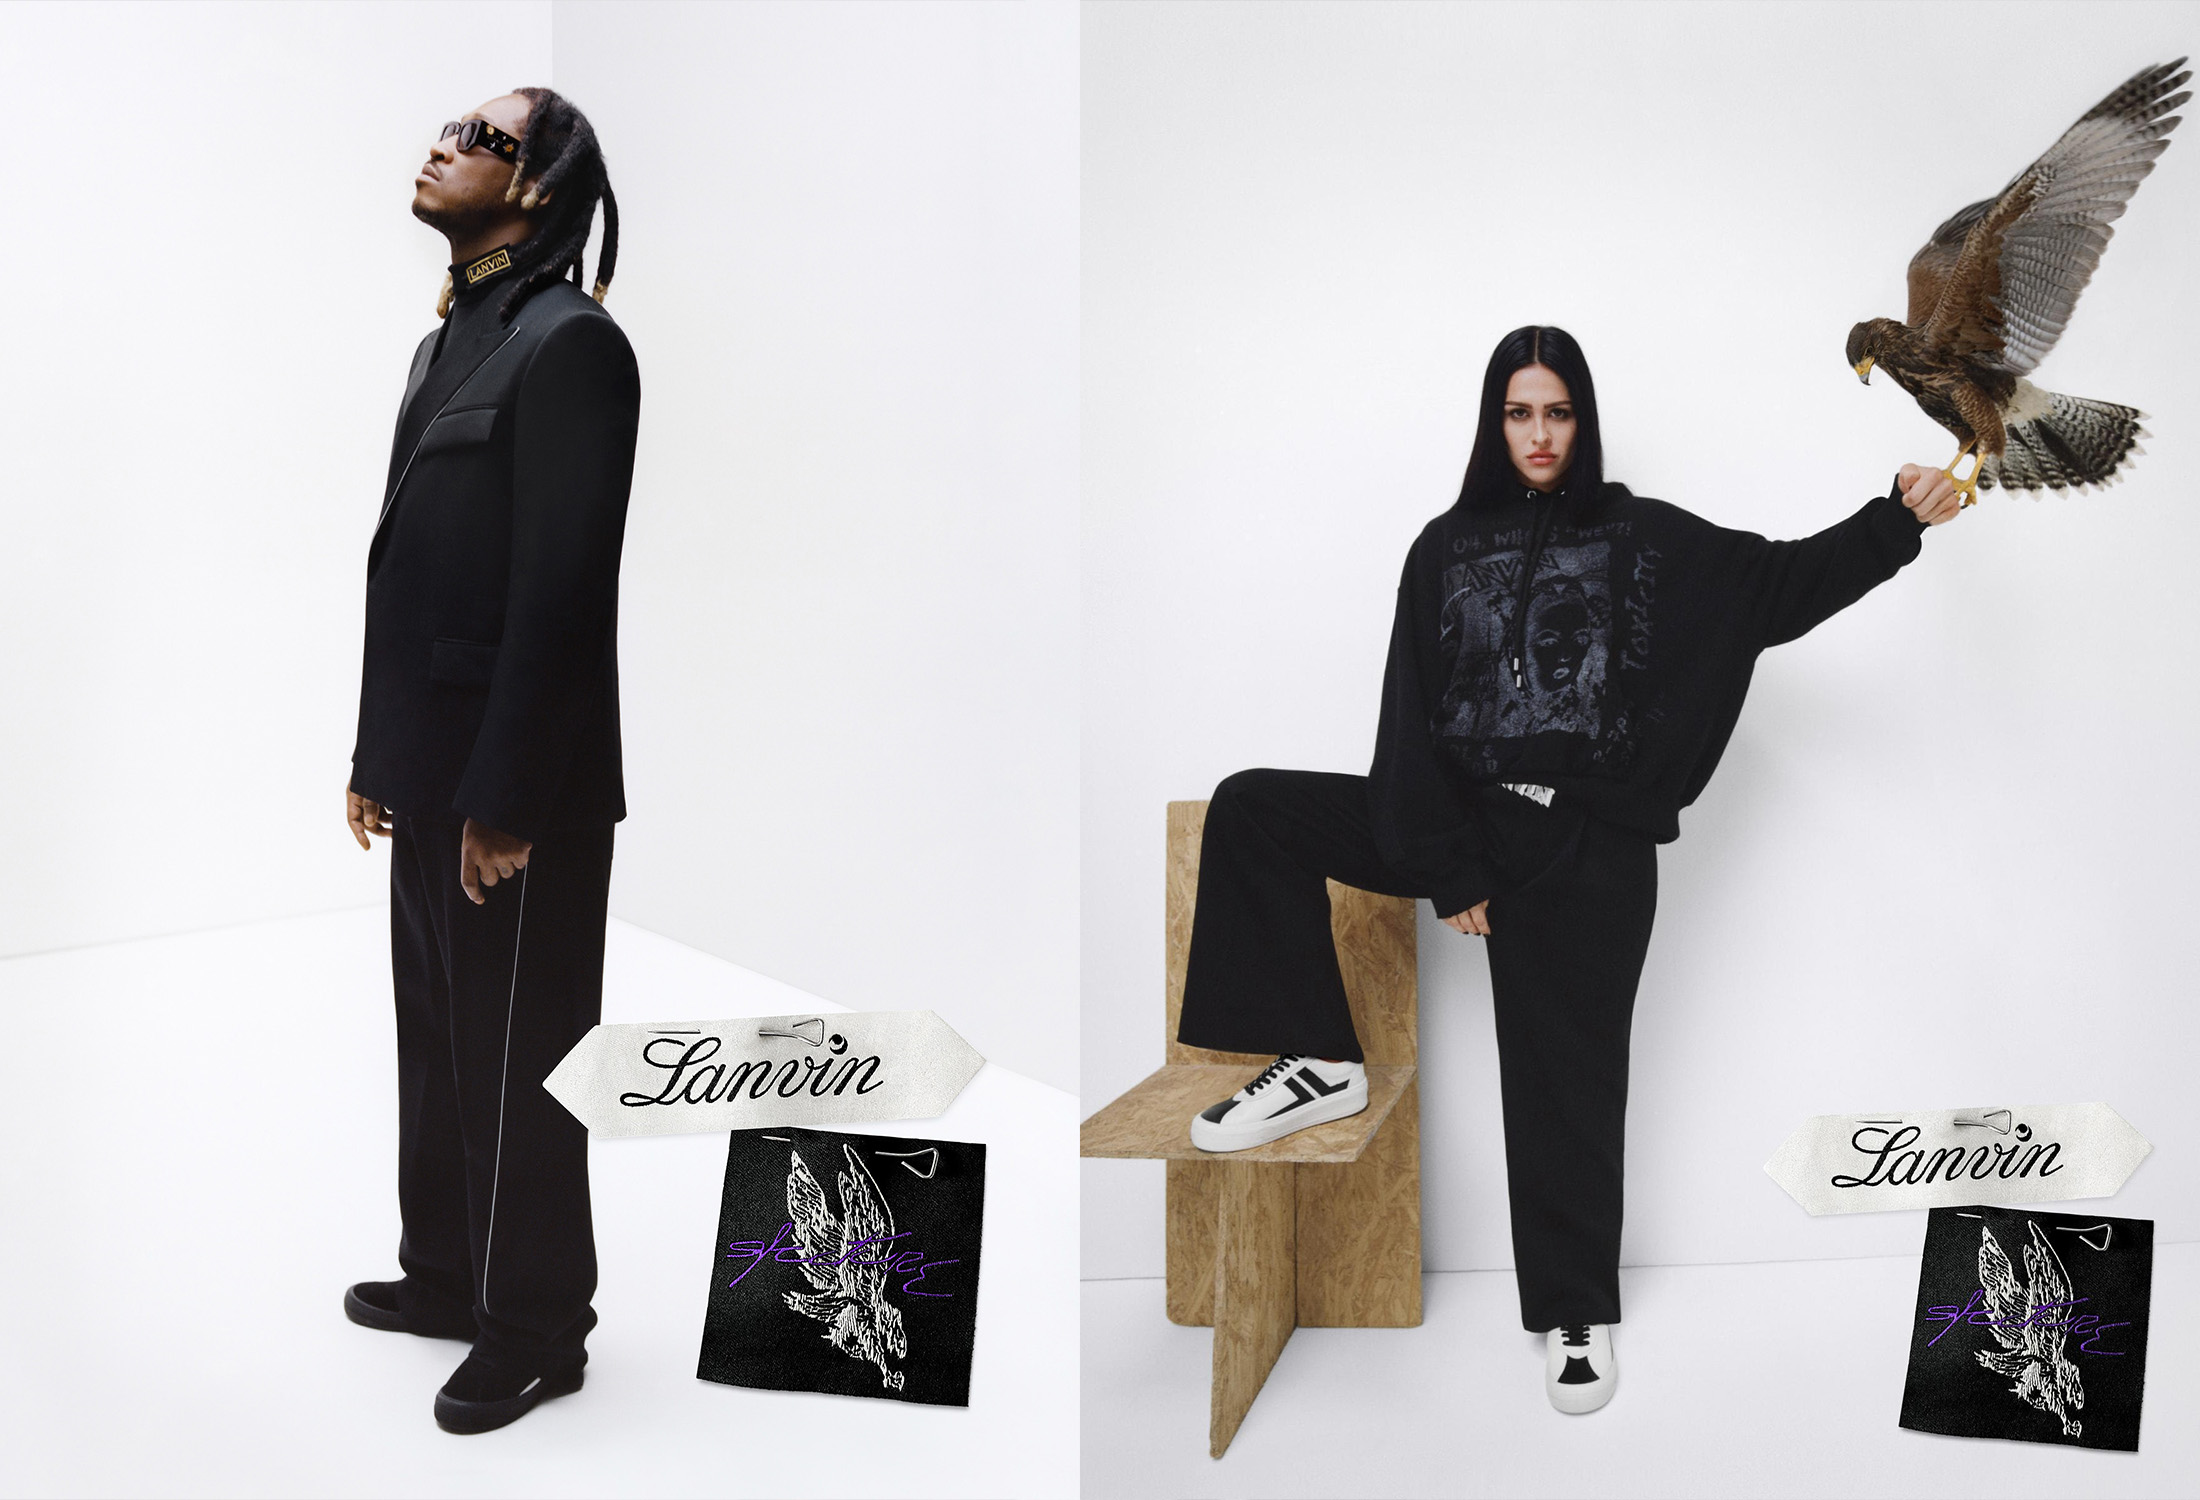 The Final Frontier: Future's Latest Drop For Lanvin Lab